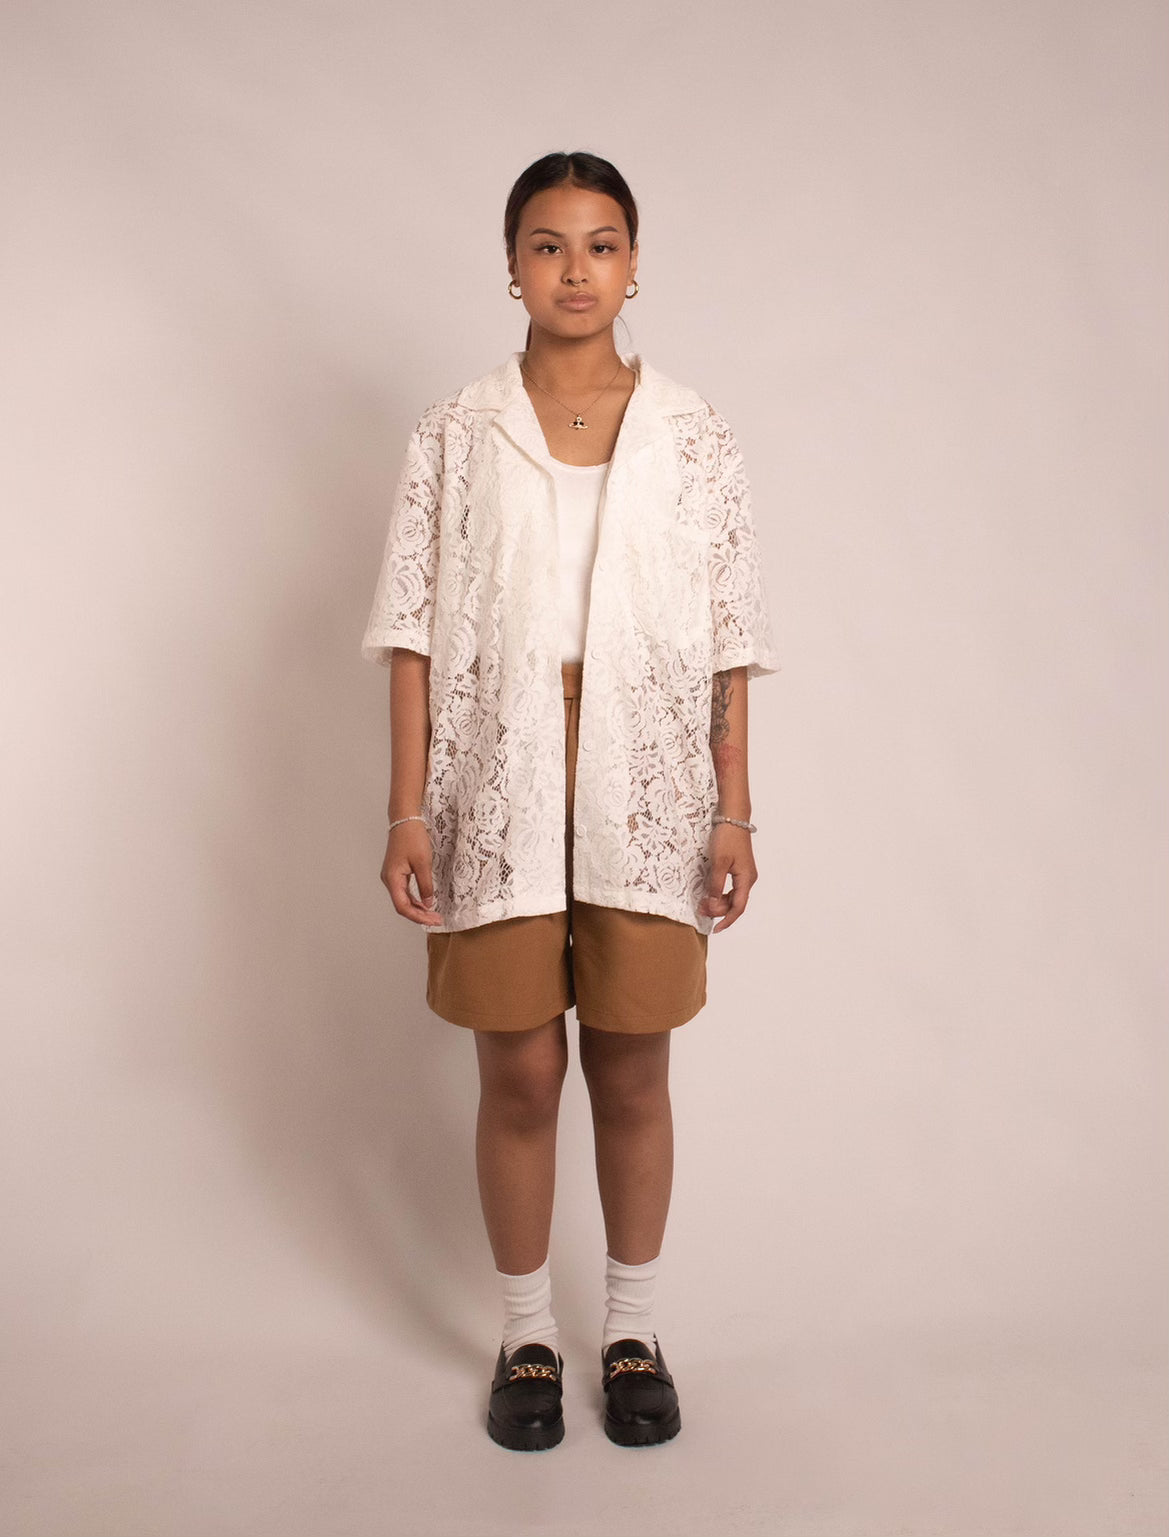 Floral Lace Open-Collar Shirt - "White"